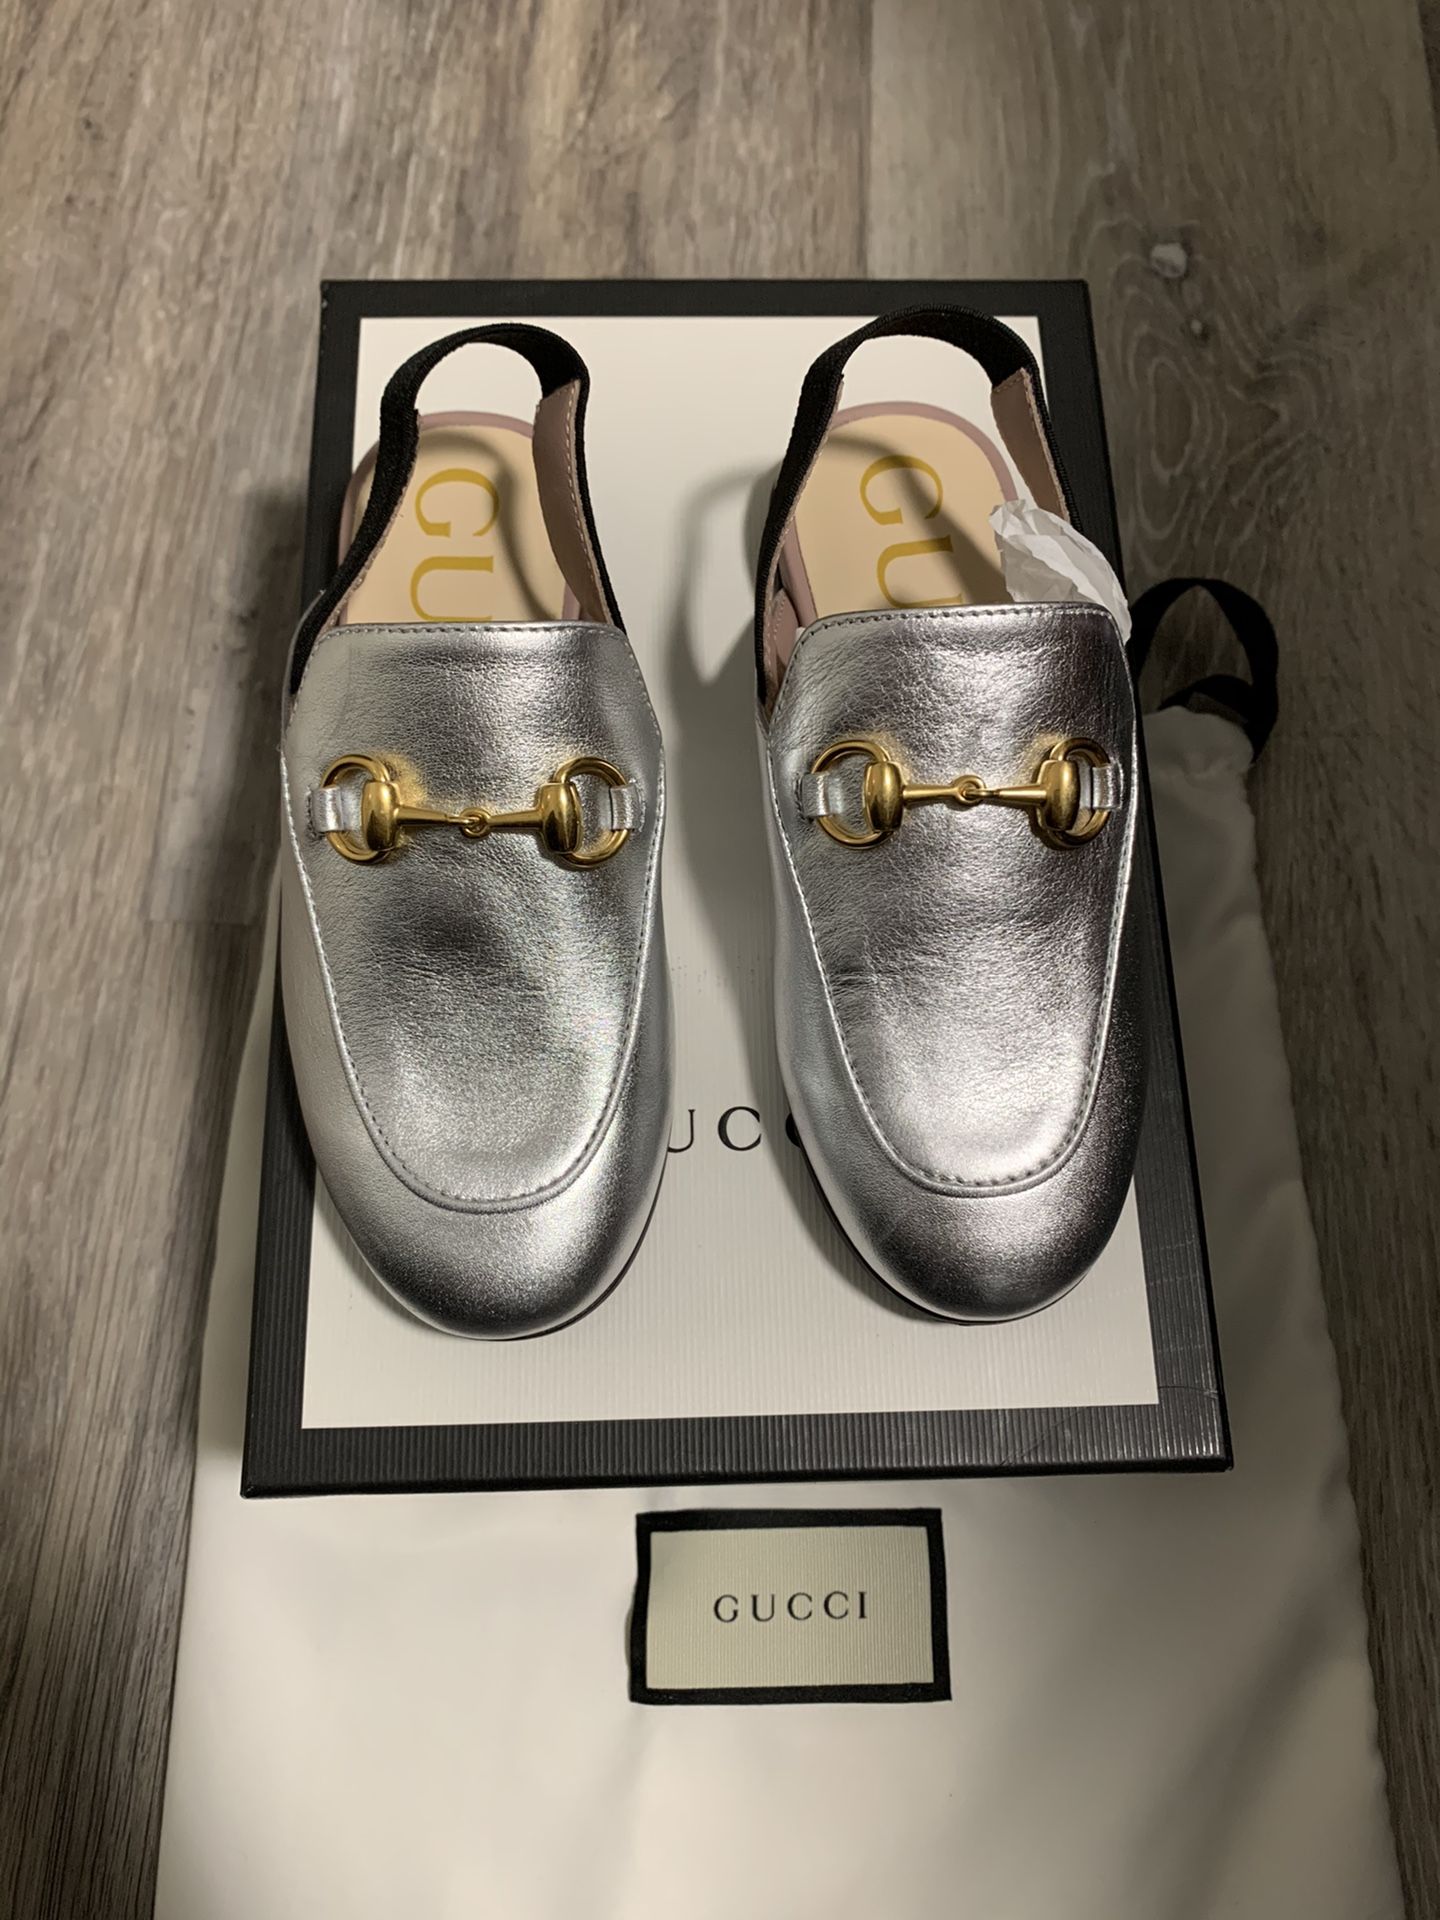 Gucci Princetown Loafer Size 27 Toddler